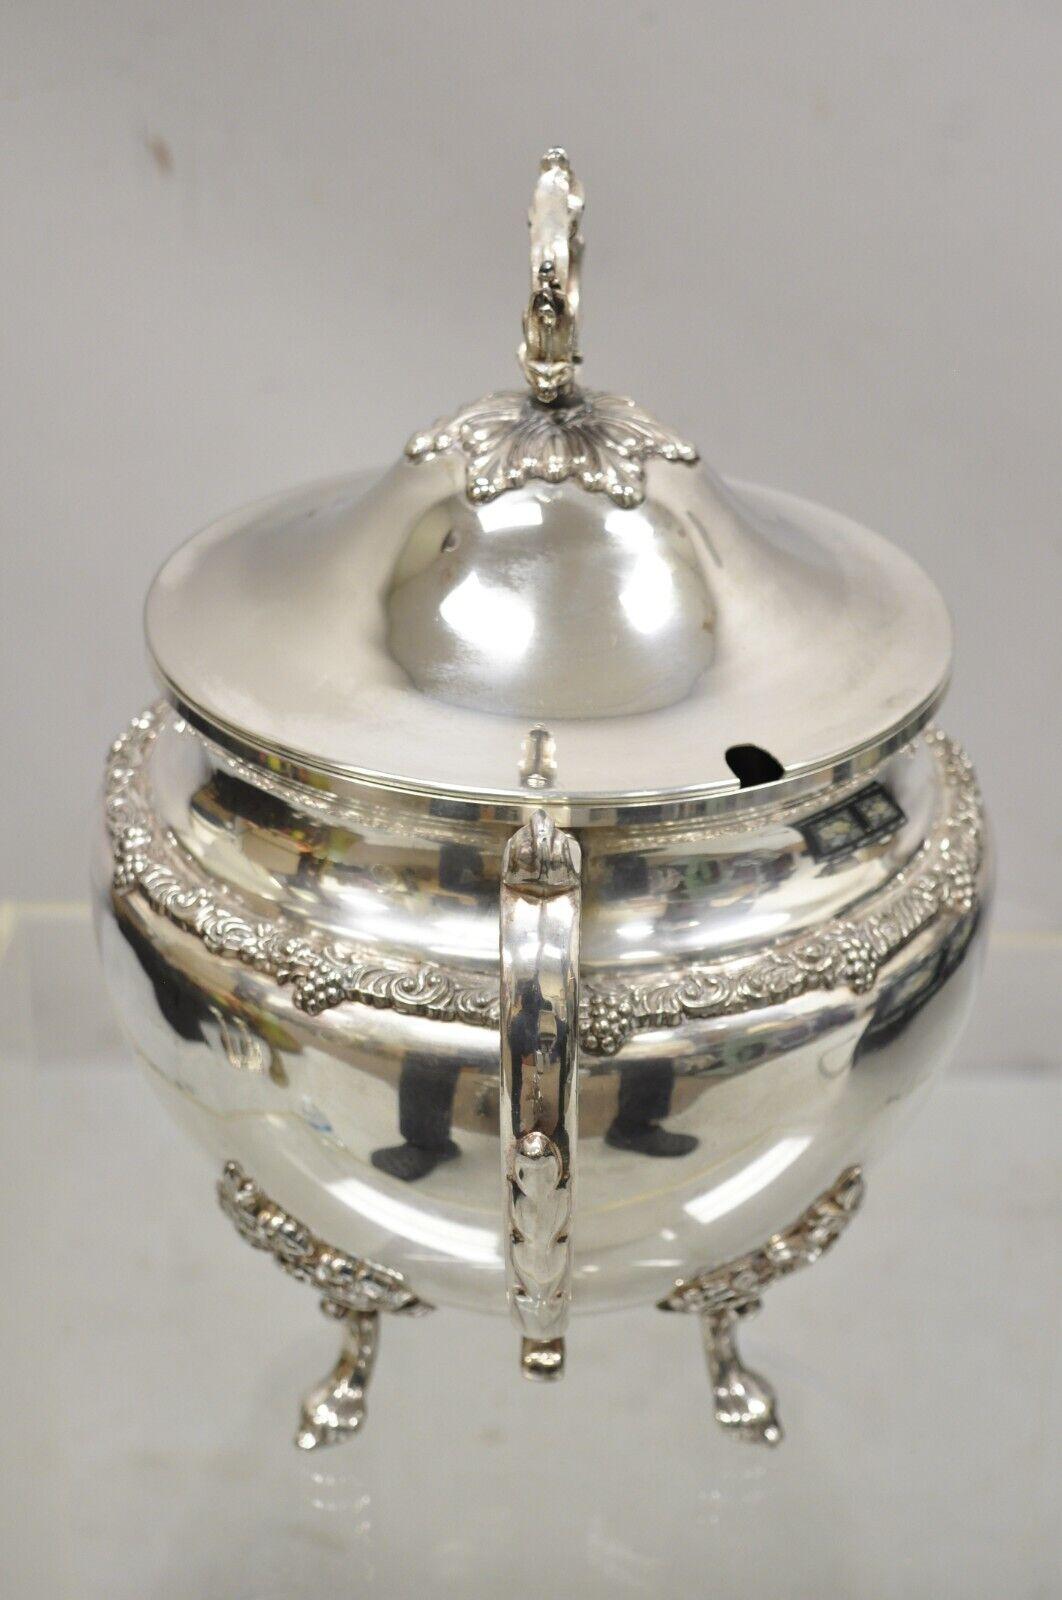 Vintage silver plated soup tureen serving pot with lid and fancy twin handles. Item features a lid with cutout for ladle, ornate handle, ornate twin handles marked 